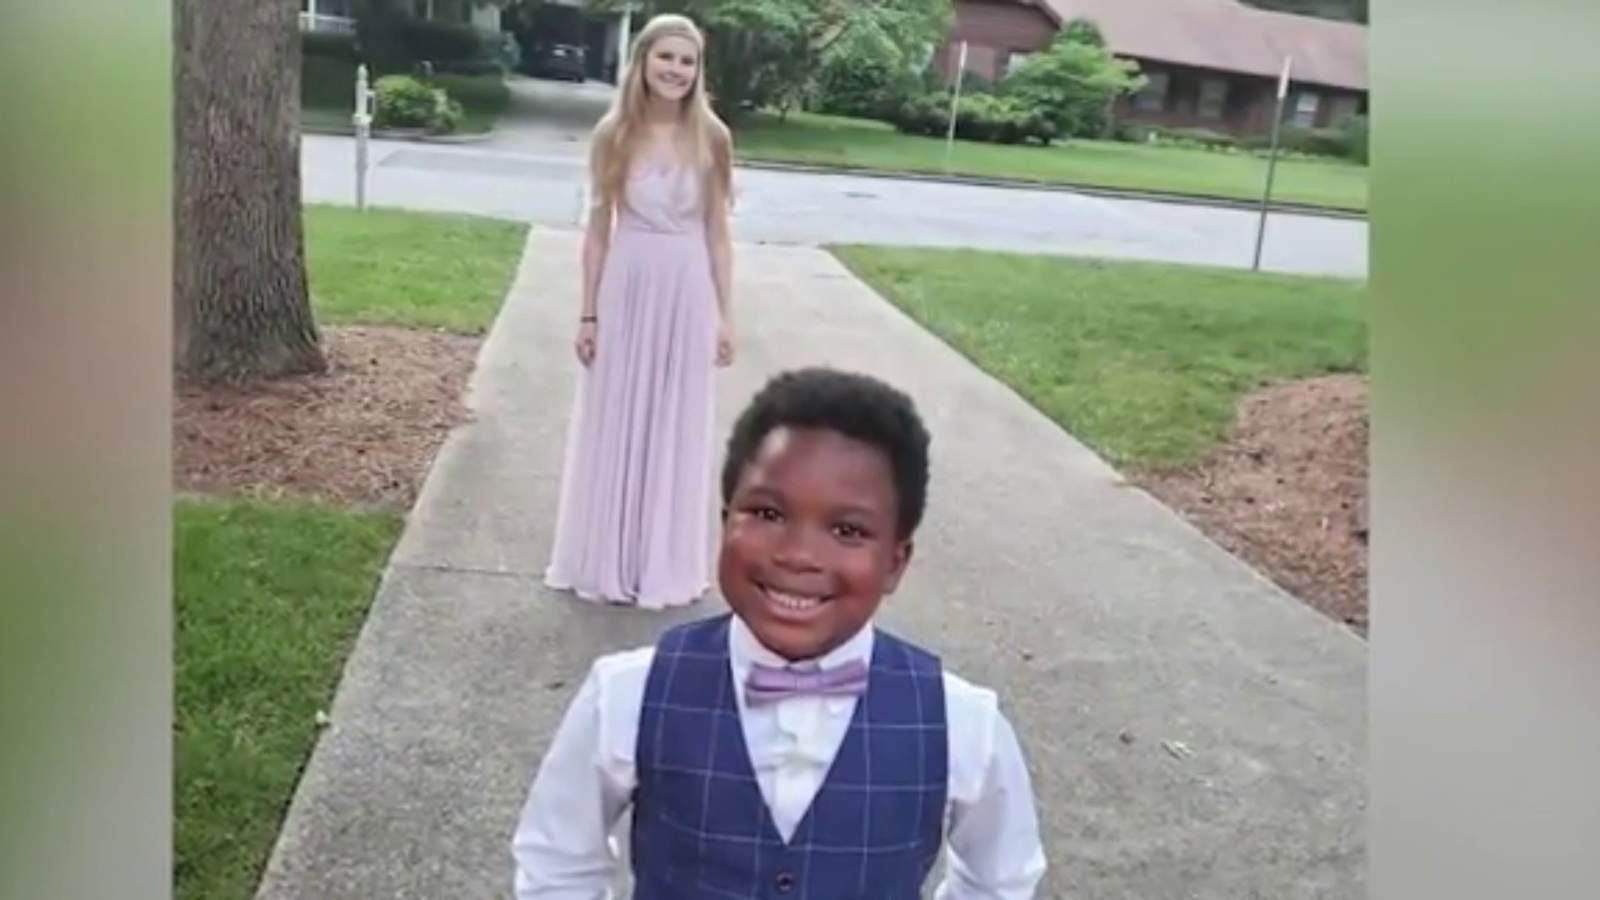 7-year-old boy throws a prom for his nanny after hers was canceled